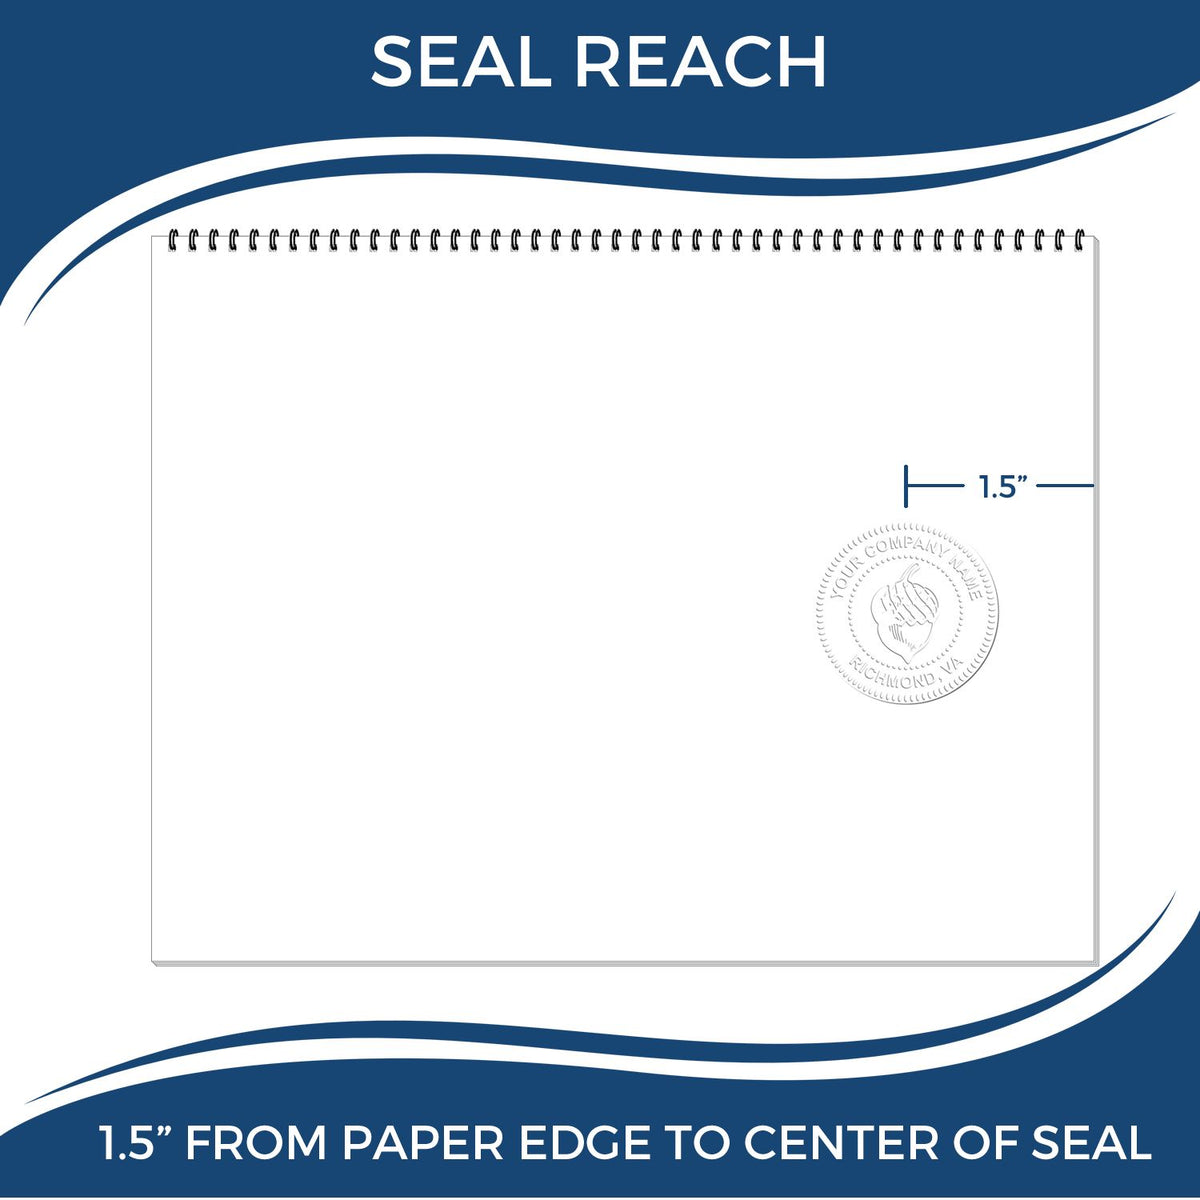 An infographic showing the seal reach which is represented by a ruler and a miniature seal image of the Gift Arkansas Engineer Seal